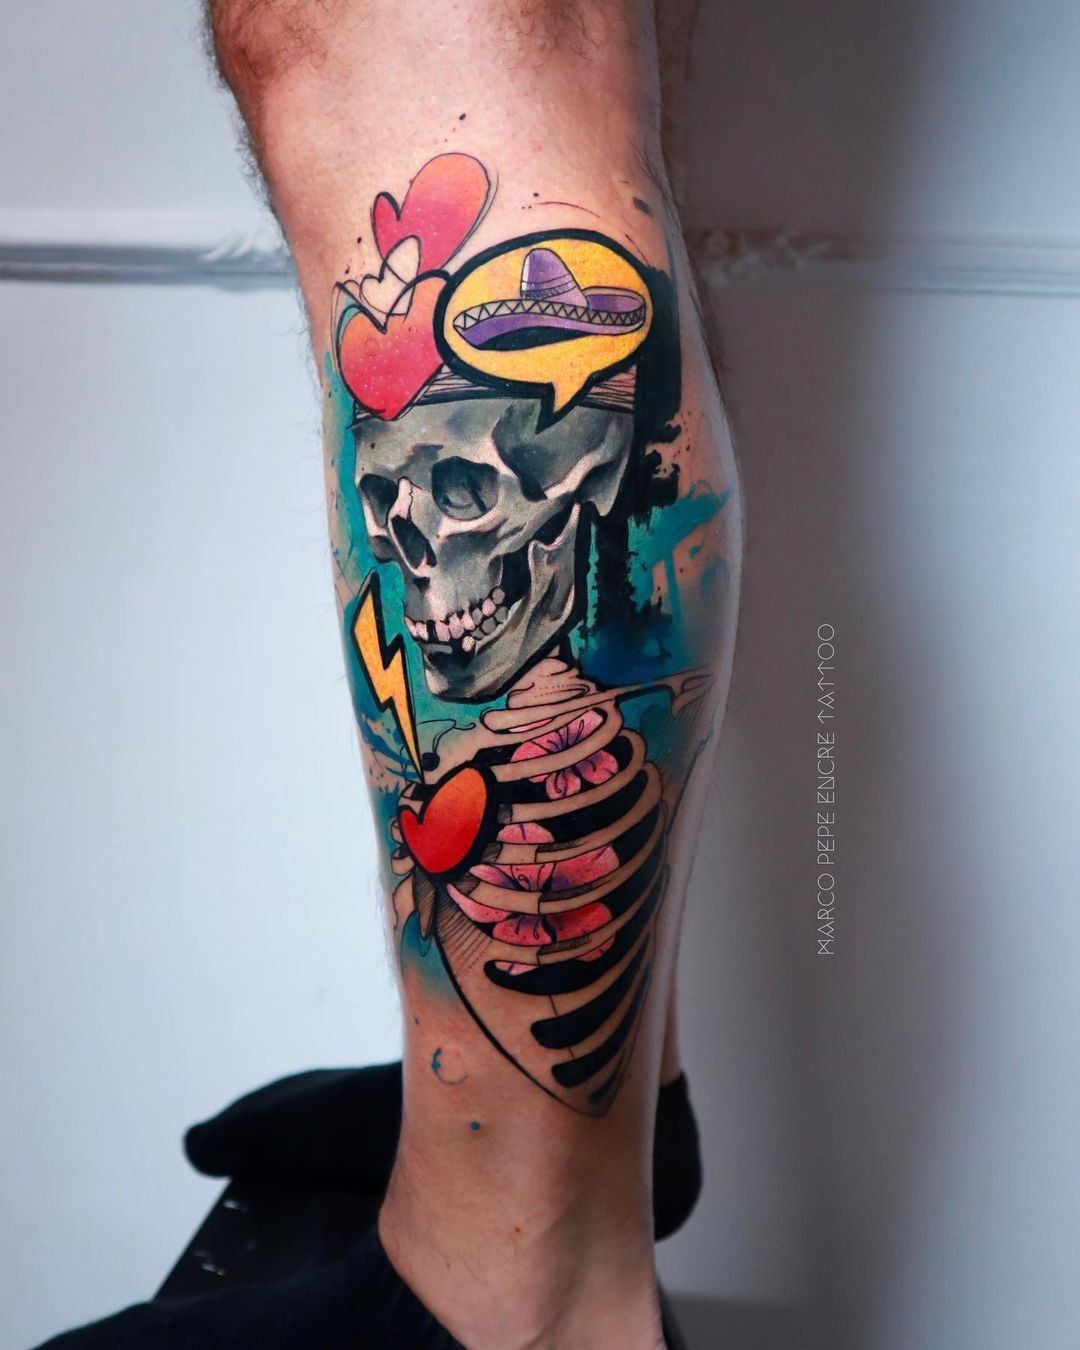 Forearm Watercolor Skull tattoo at theYoucom